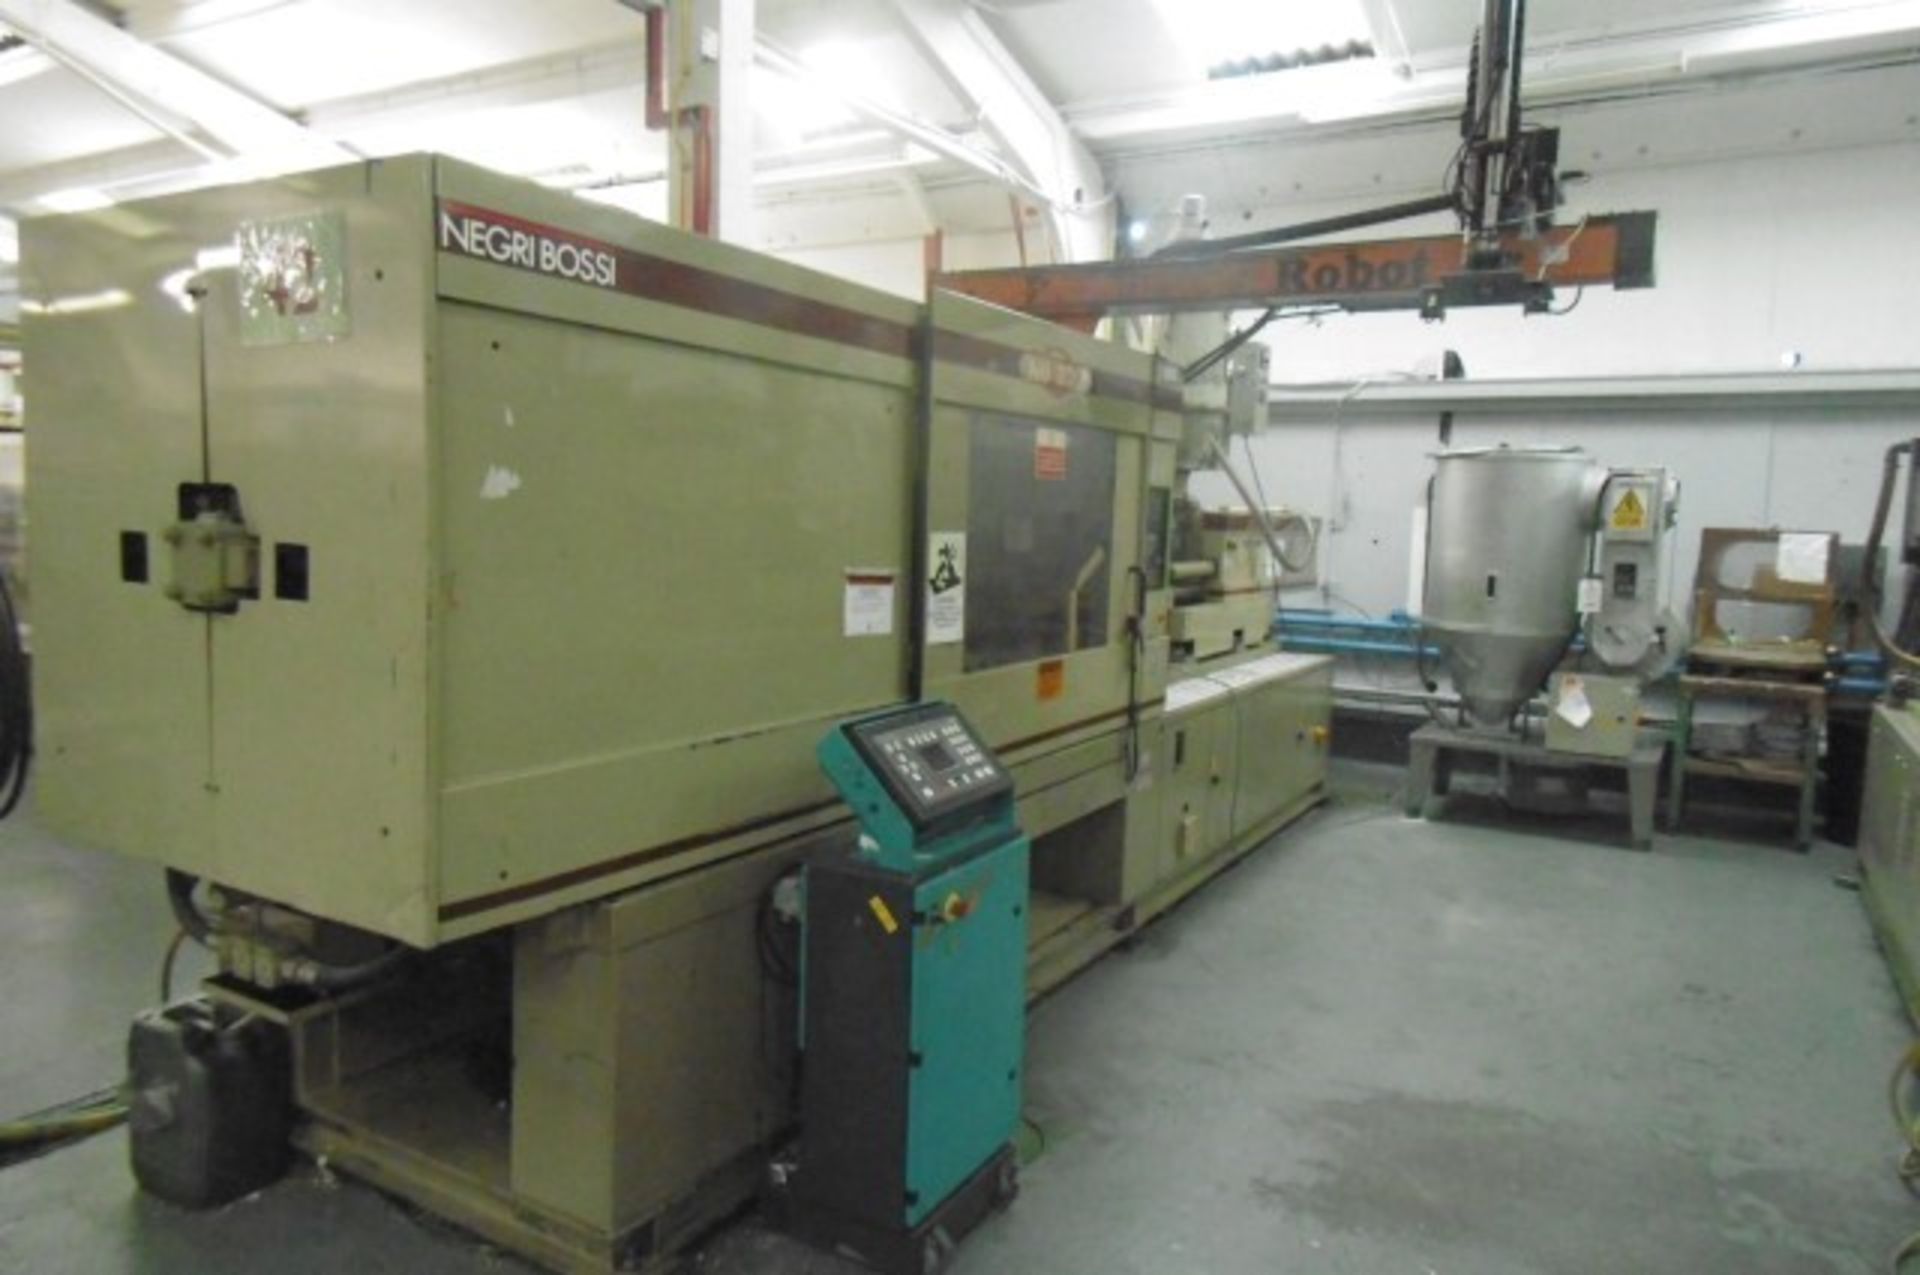 Negri Bossi NB330 horizontal injection moulding machine s/n. 54-197 Date of Manufacture 1994 with